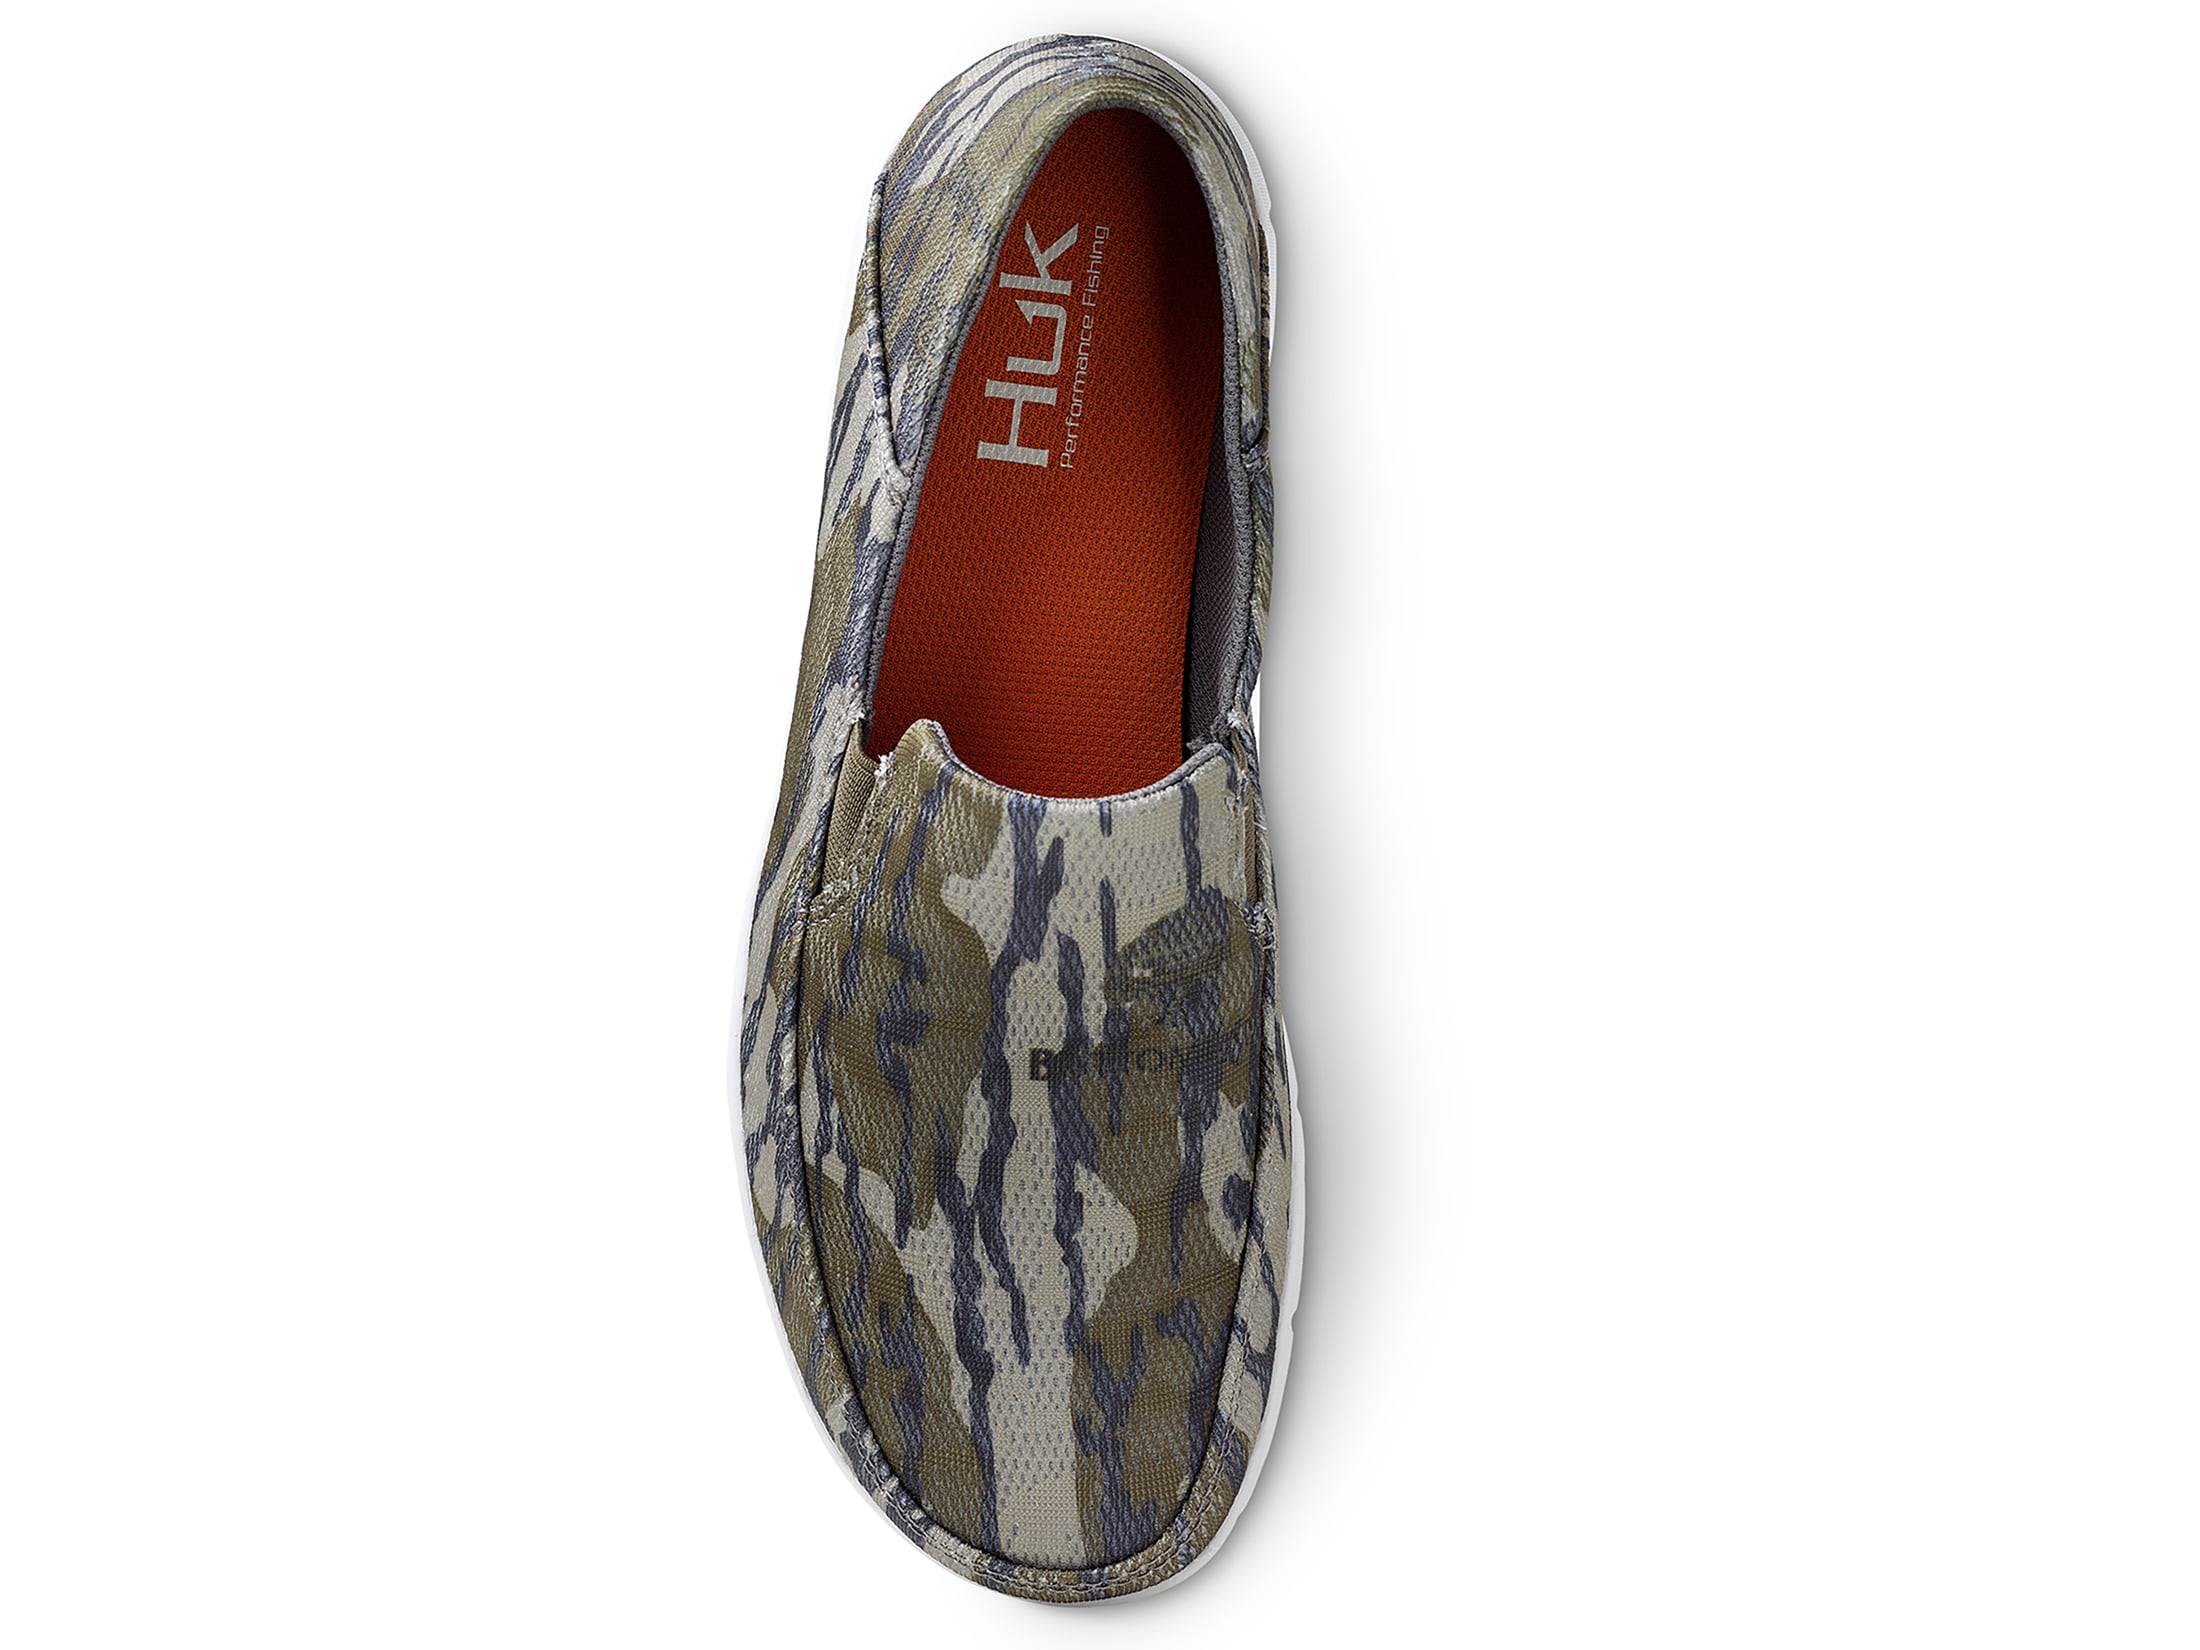 Wet Traction Fishing & Deck Shoes Mossy Oak Hydro Standards HUK Brewster Slip On Shoe 9 